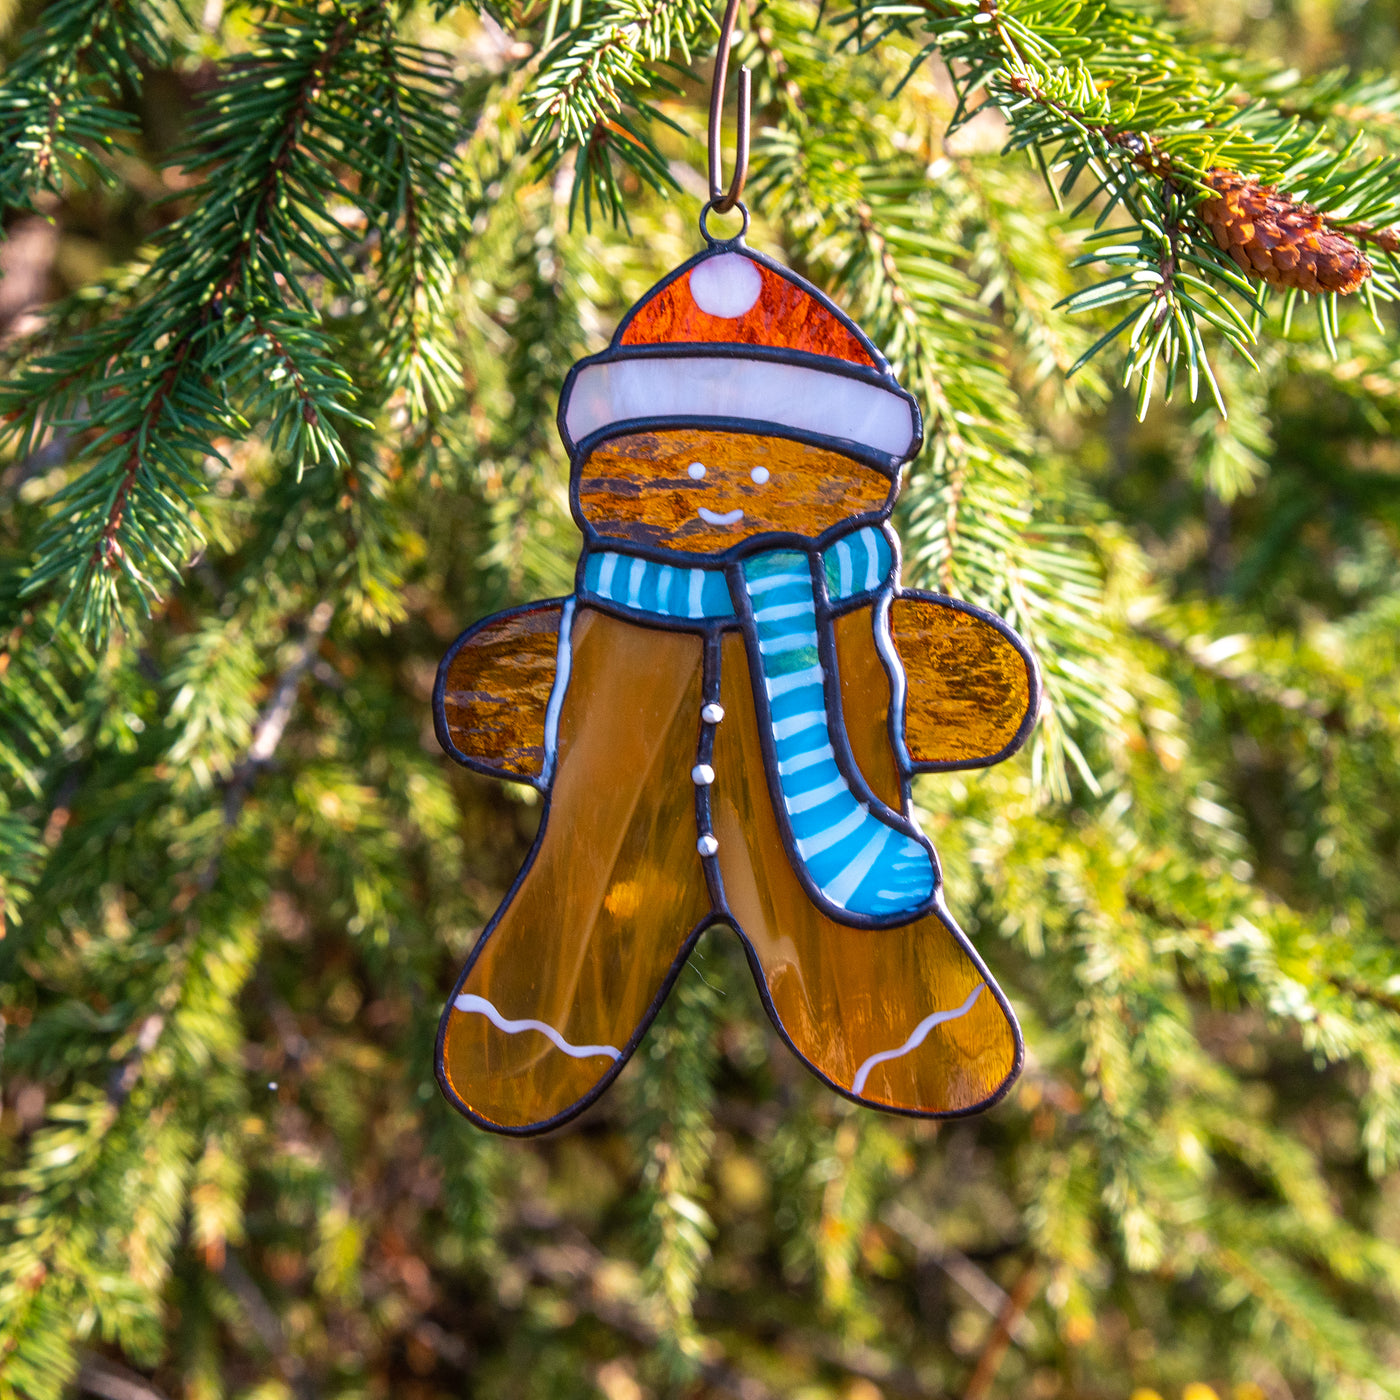 Stained glass cookie man suncatcher used as a New Year Tree decoration